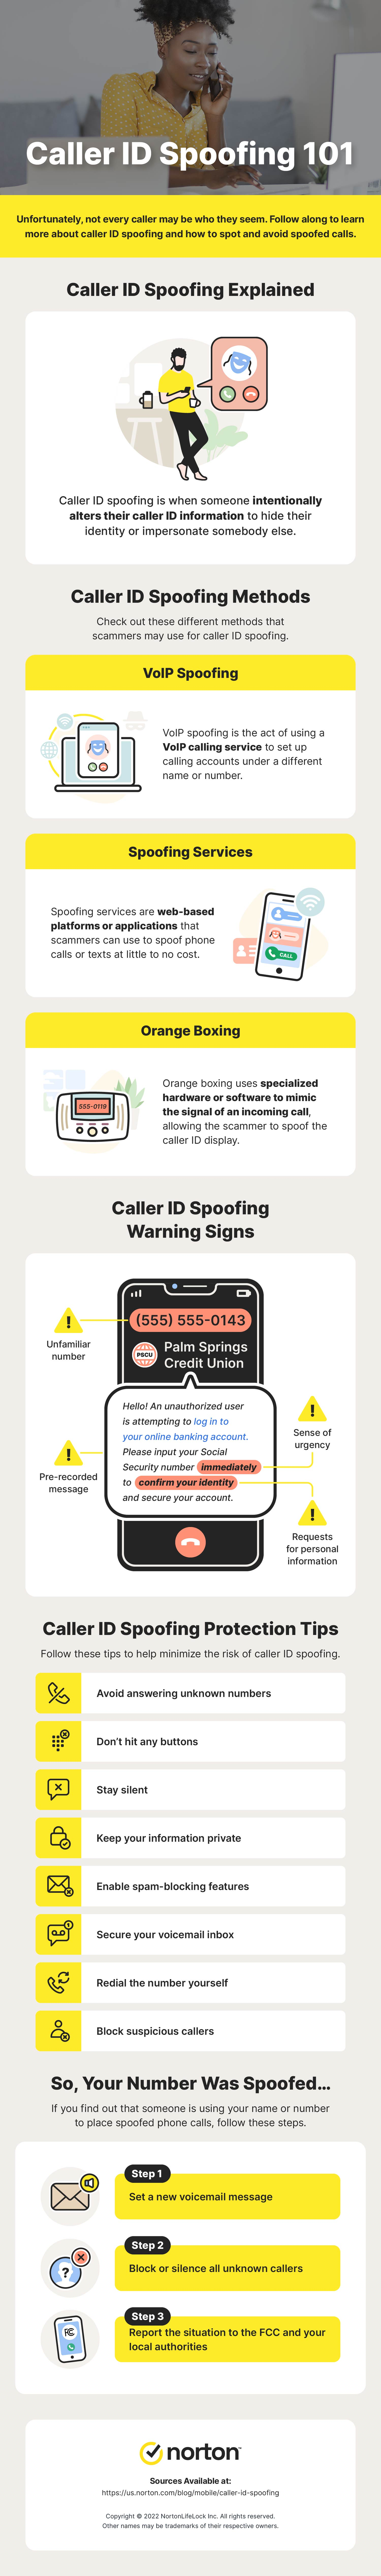 An infographic covers caller ID spoofing, from spoofing methods to protection tips.